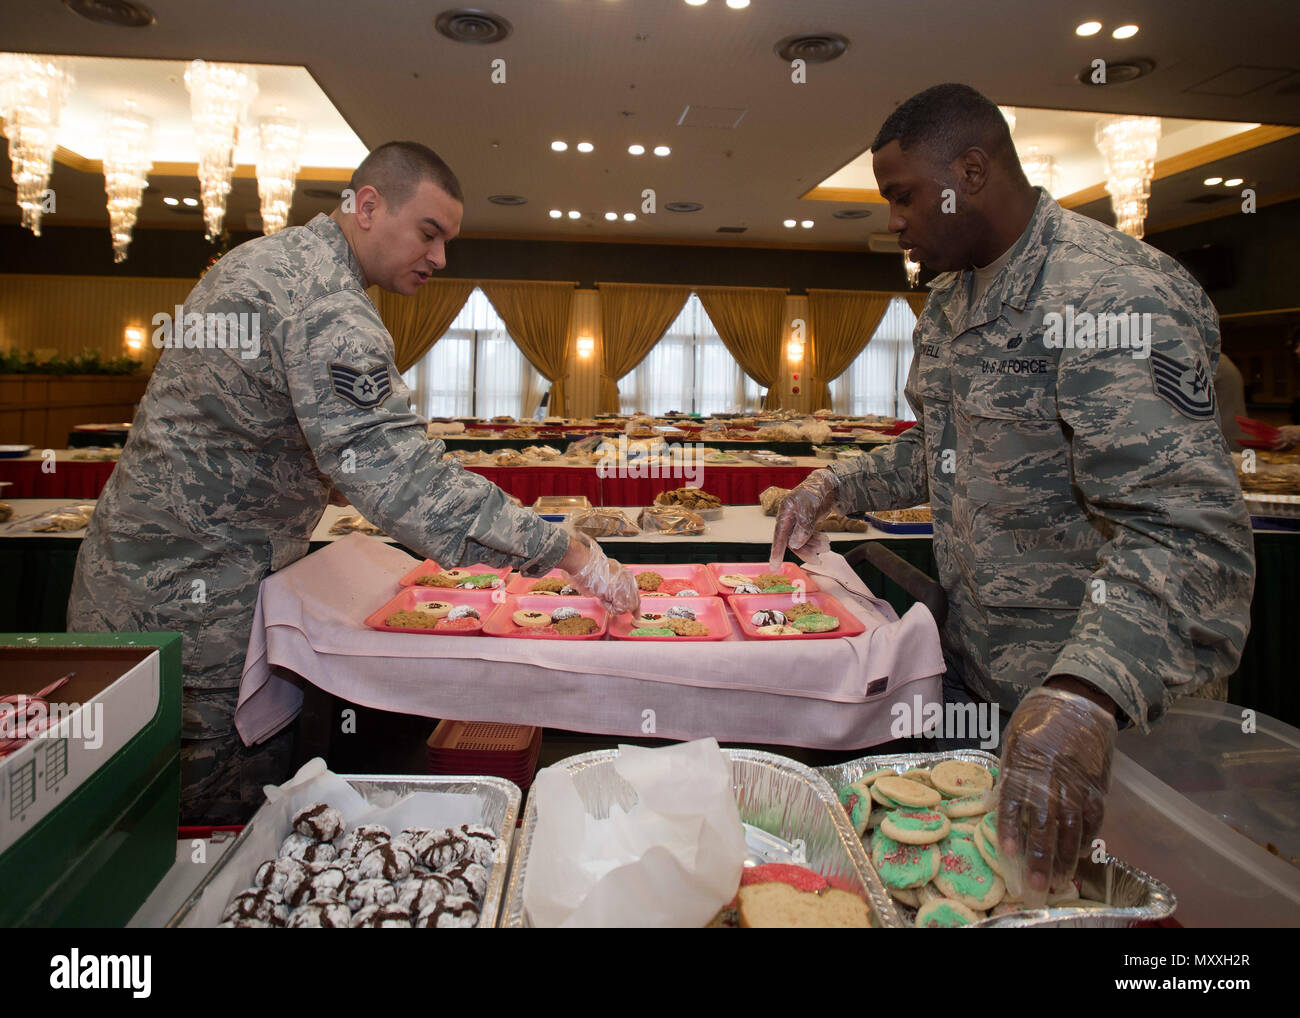 U.S. Air Force Staff Sgt. Robert Smalling, left, the 35th Medial Operations Squadron immunizations NCO in charge, and Tech. Sgt. Johnnie Powell, right, the 35th Force Support Squadron readiness and mortuary affairs NCO in charge, divide cookies during the annual Cookie Caper event at Misawa Air Base, Japan, Dec. 7, 2016. Volunteers gave more than 14,400 home-baked cookies to the event, while others donated dough to be cooked. (U.S. Air Force photo by Senior Airman Deana Heitzman) Stock Photo